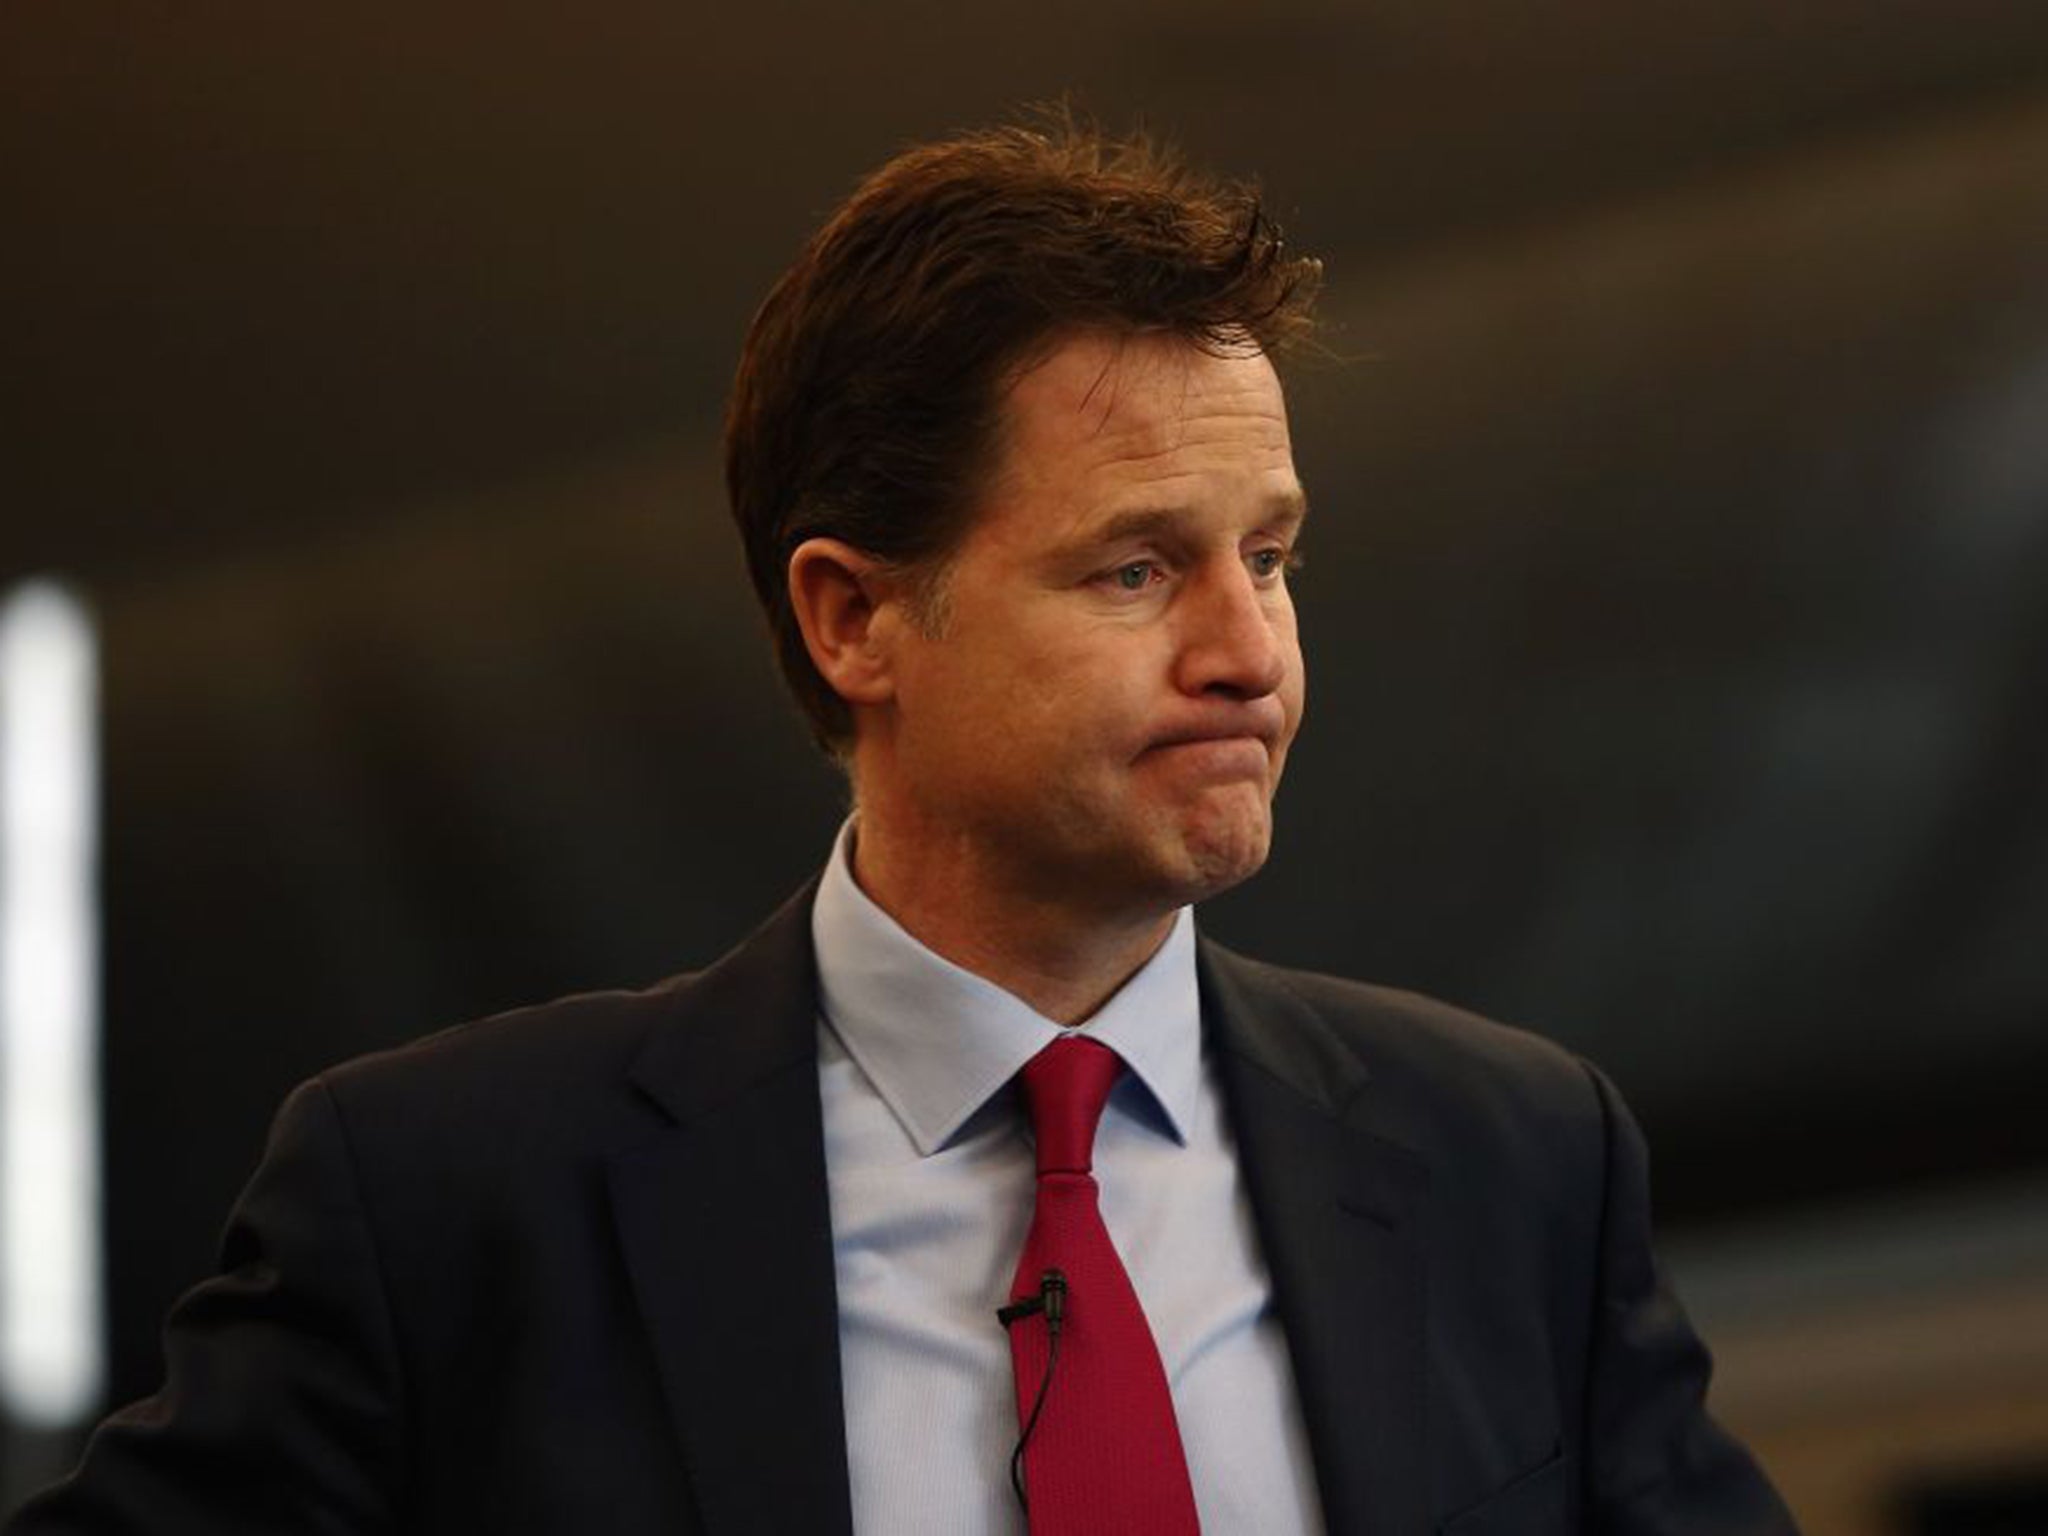 Nick Clegg has told BBC’s Sunday Politics programme that he will be too busy to take on Oliver Coppard, the Labour candidate, in a live television debate